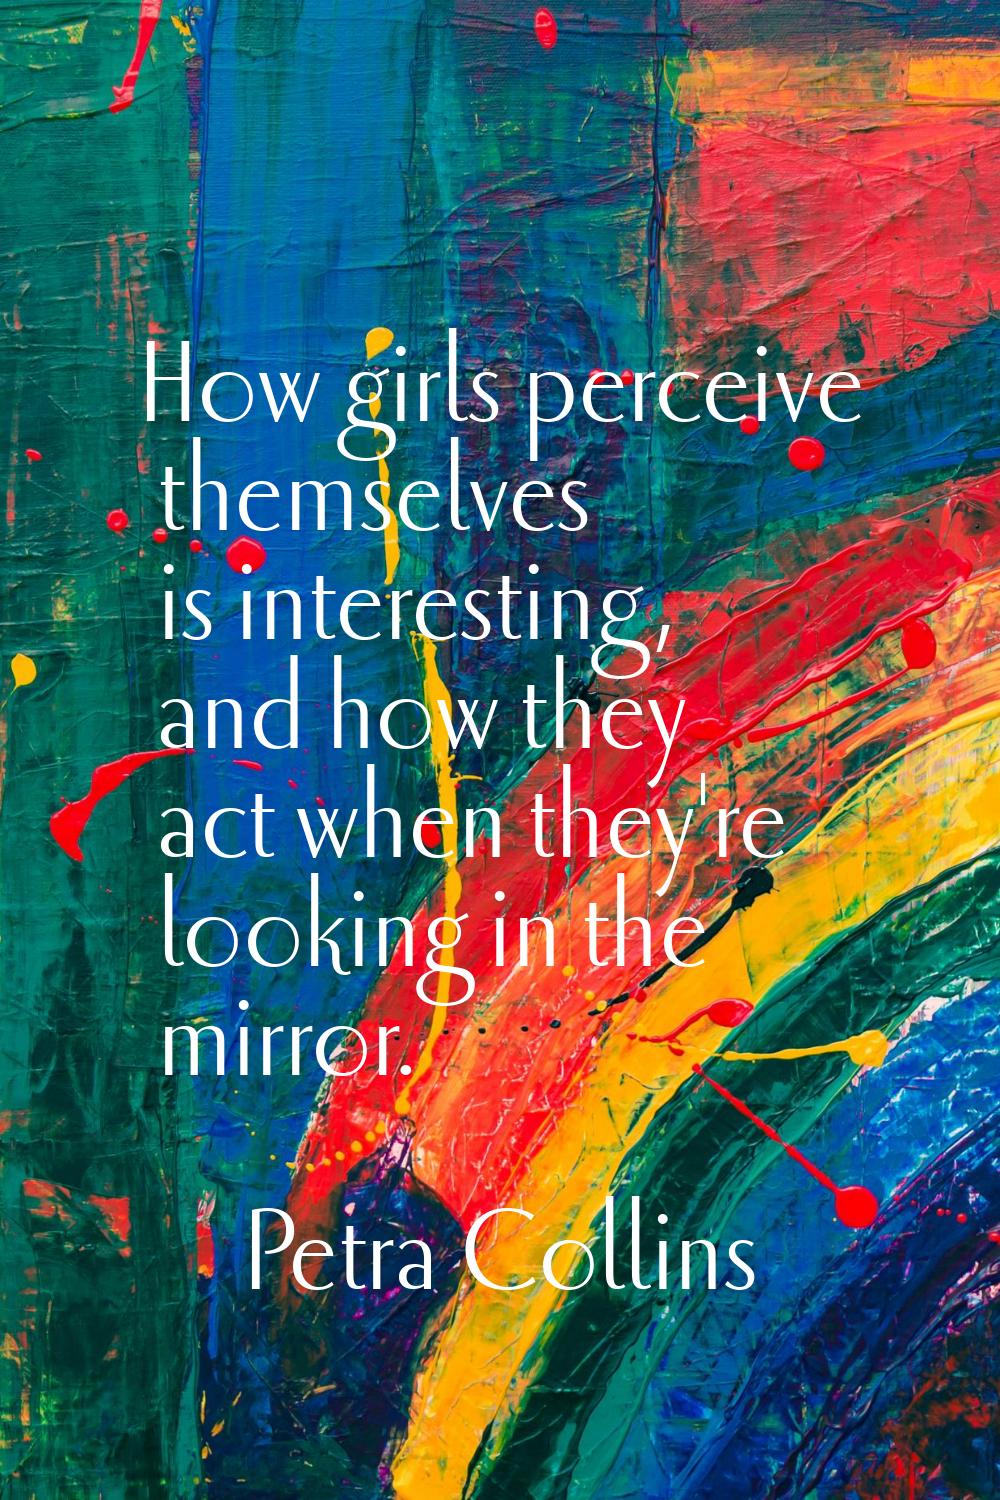 How girls perceive themselves is interesting, and how they act when they're looking in the mirror.